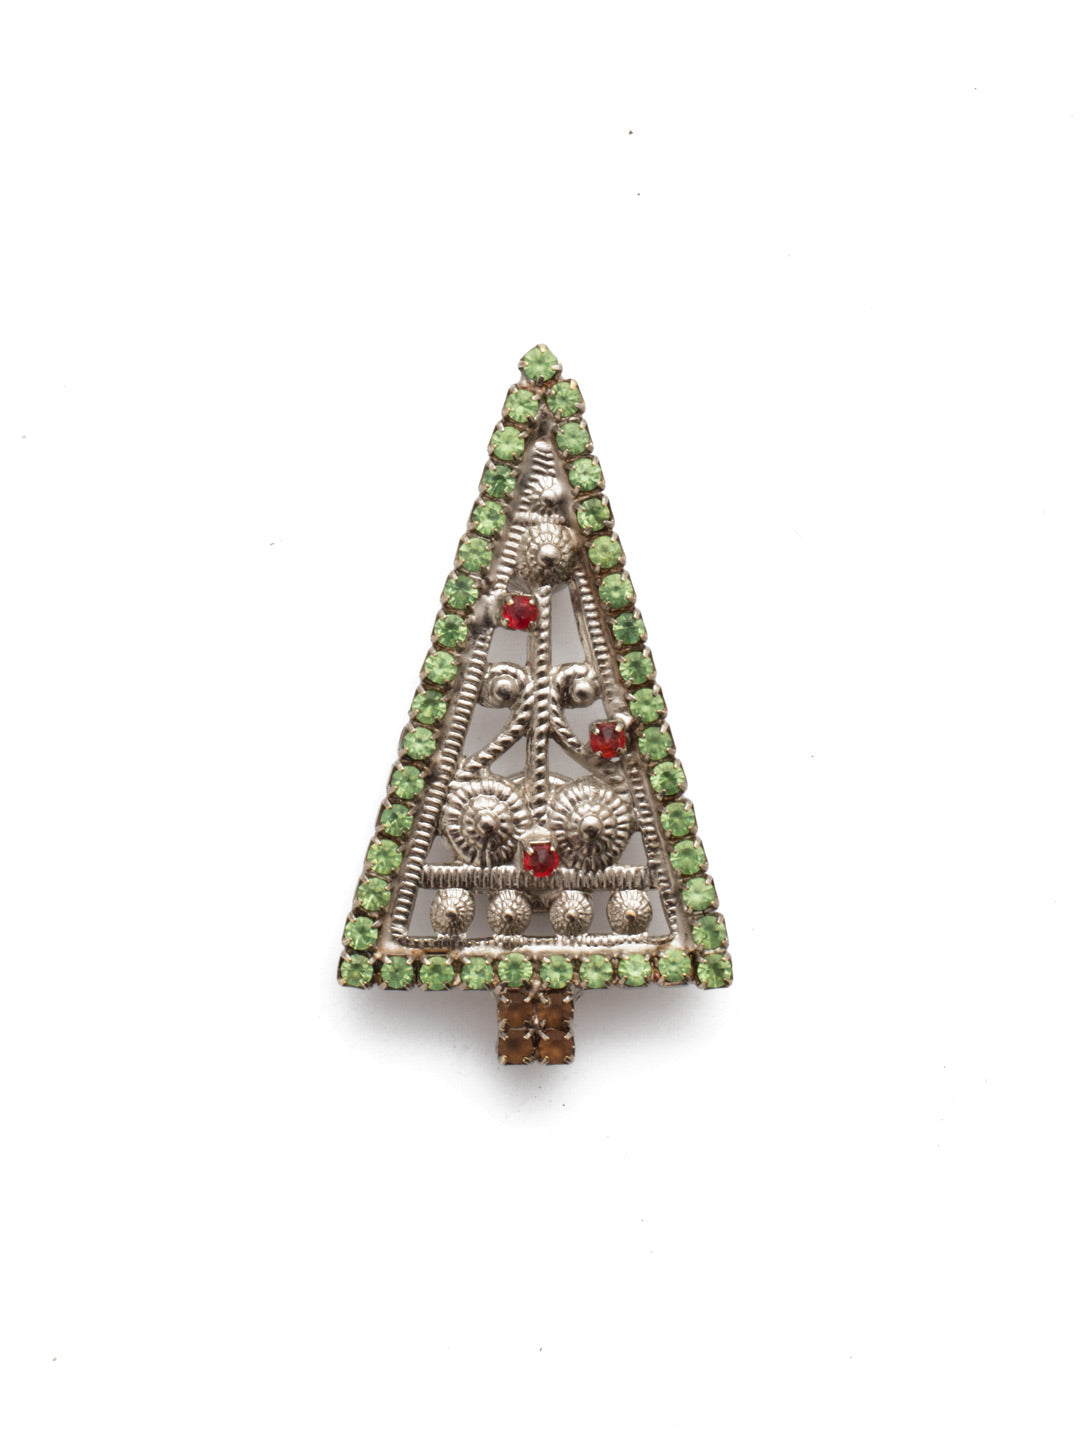 Spruce Magnetic Charm - CHM7ASSLH - <p>The Spruce Magnetic Charm will make you feel jolly when bag, blazer, dress or refrigerator. The charm is covered in mulipule colored crystals that resemble a christmas tree. From Sorrelli's Sleepy Hollow collection in our Antique Silver-tone finish.</p>